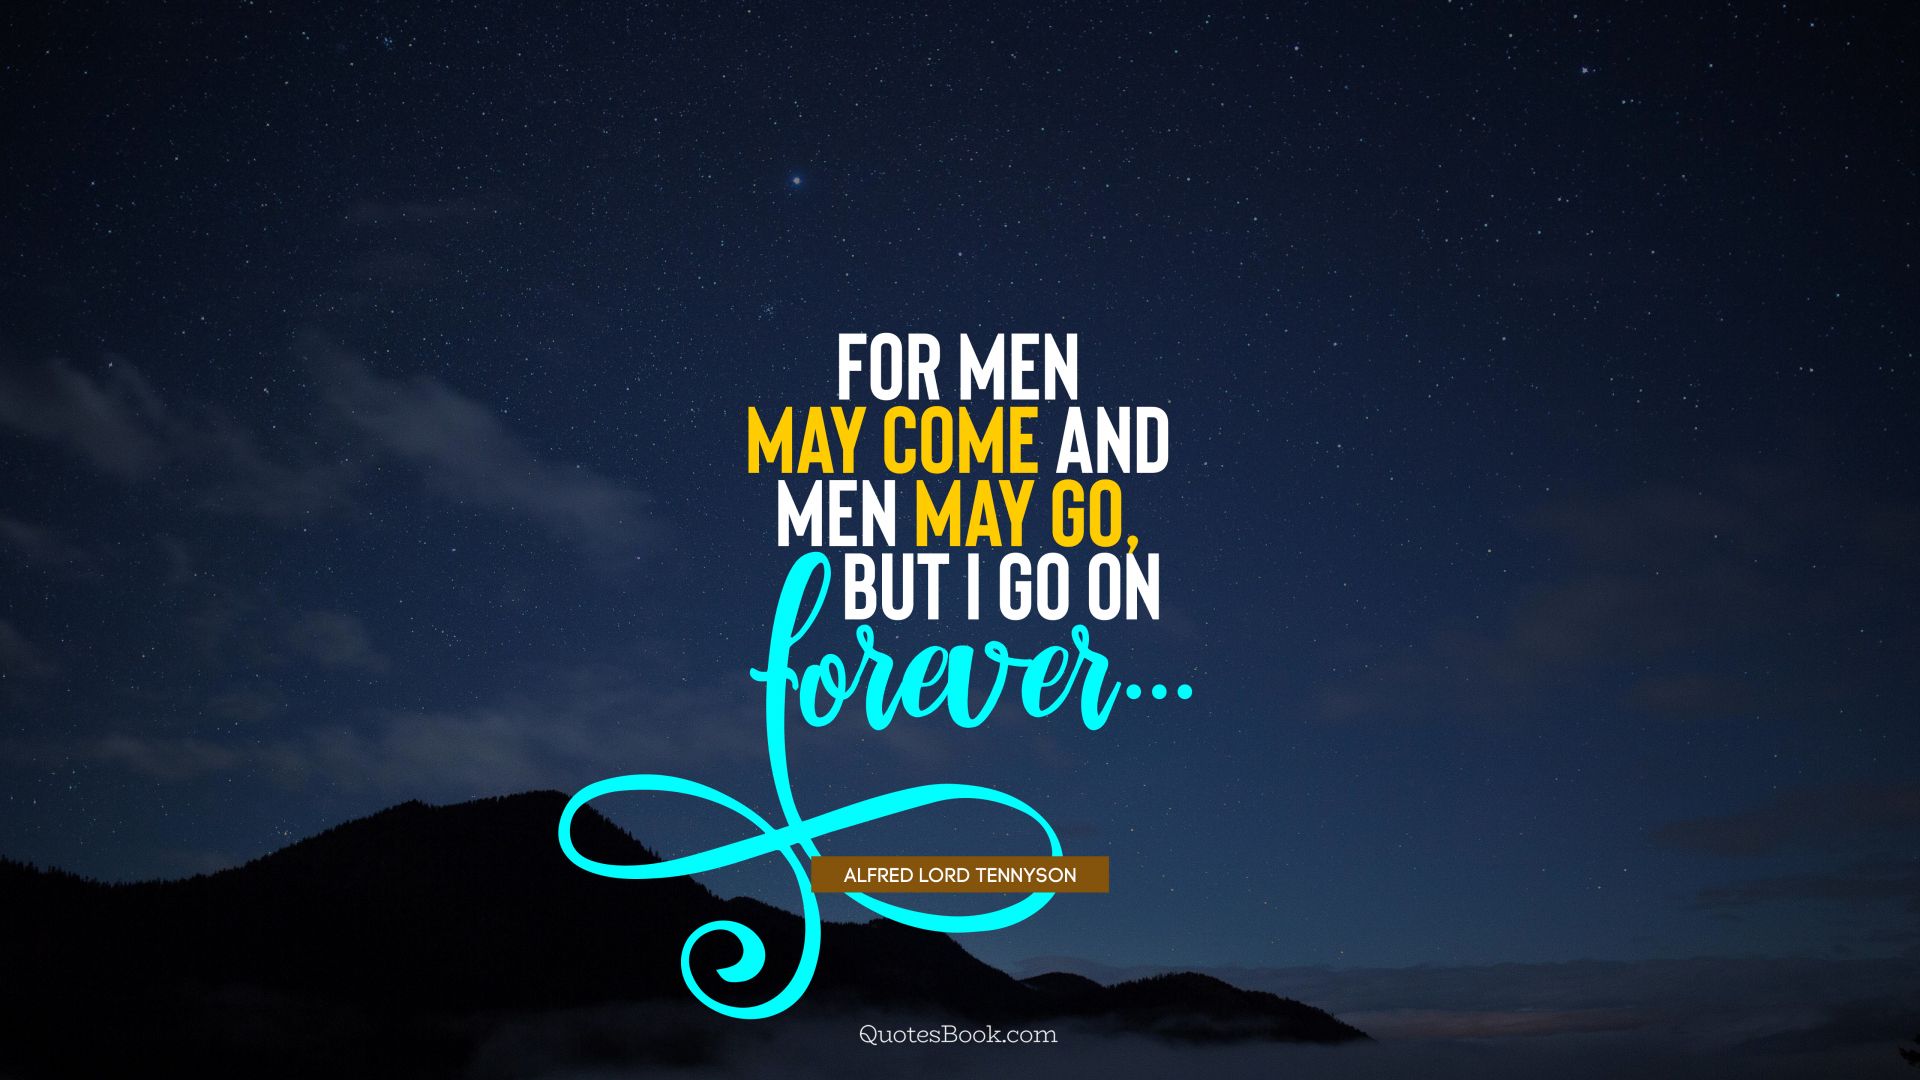 For men may come and men may go, but I go on forever.... - Quote by Alfred Lord Tennyson